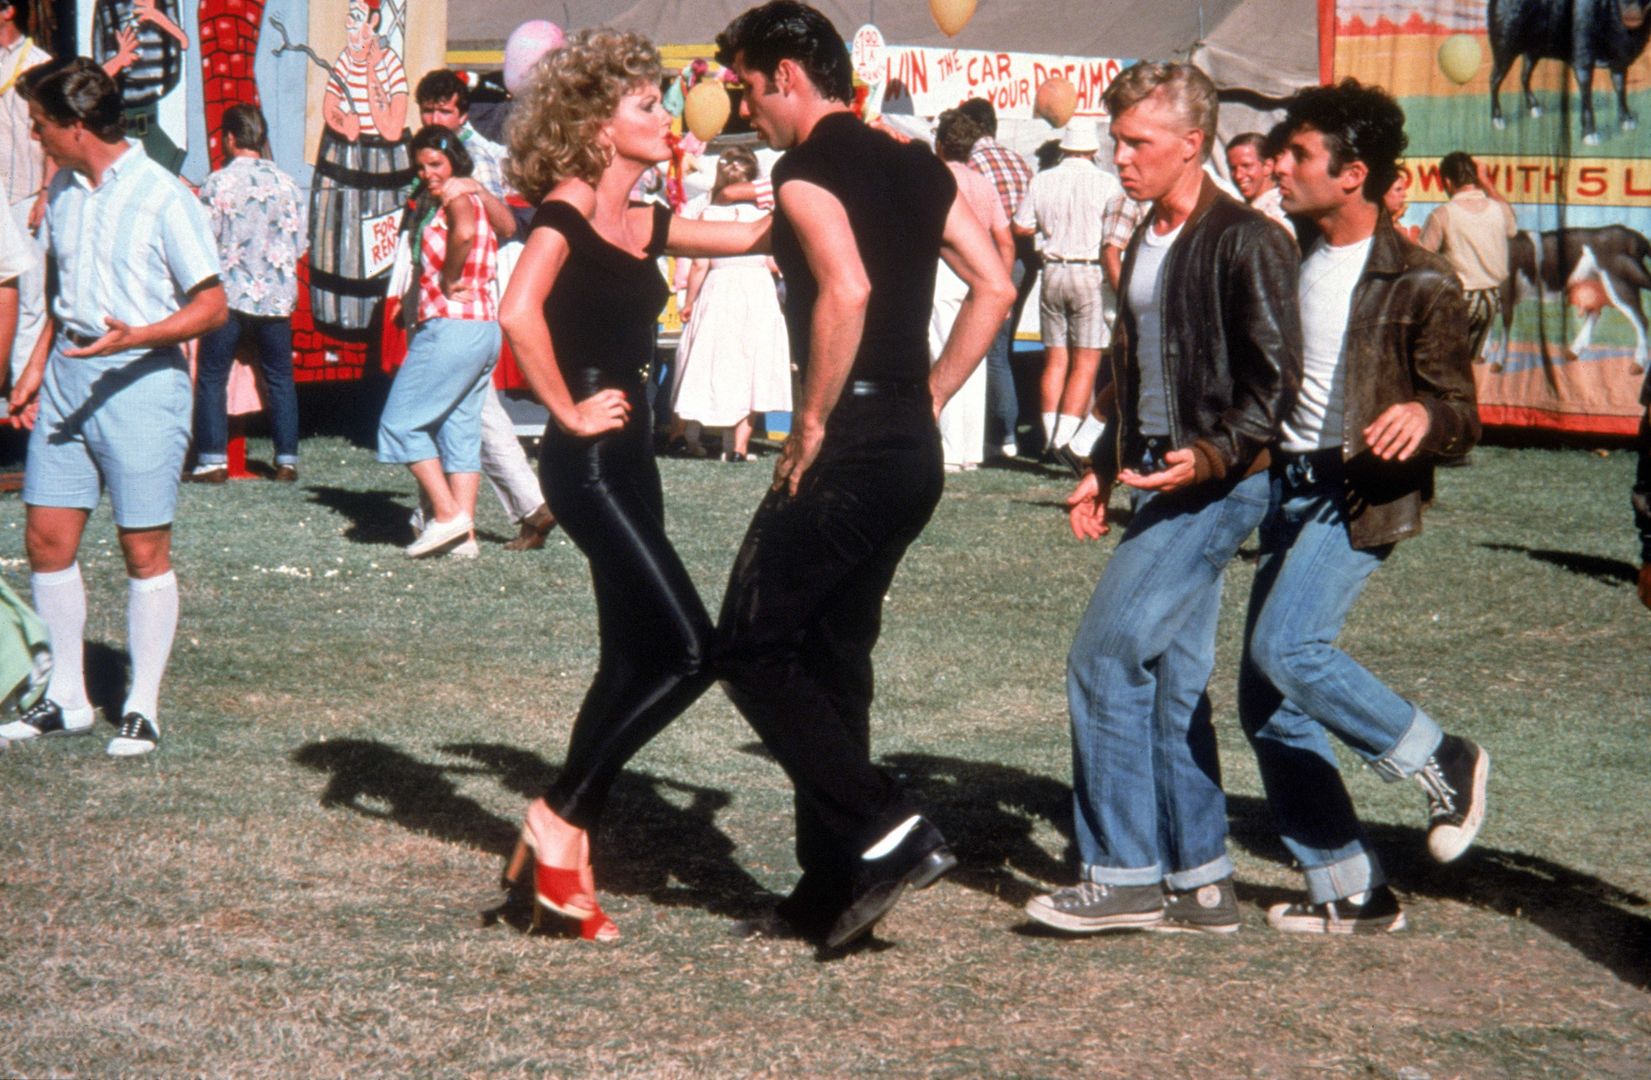 The moral of the movie Grease is that--in order to find true love--you have to change who you are as a person.